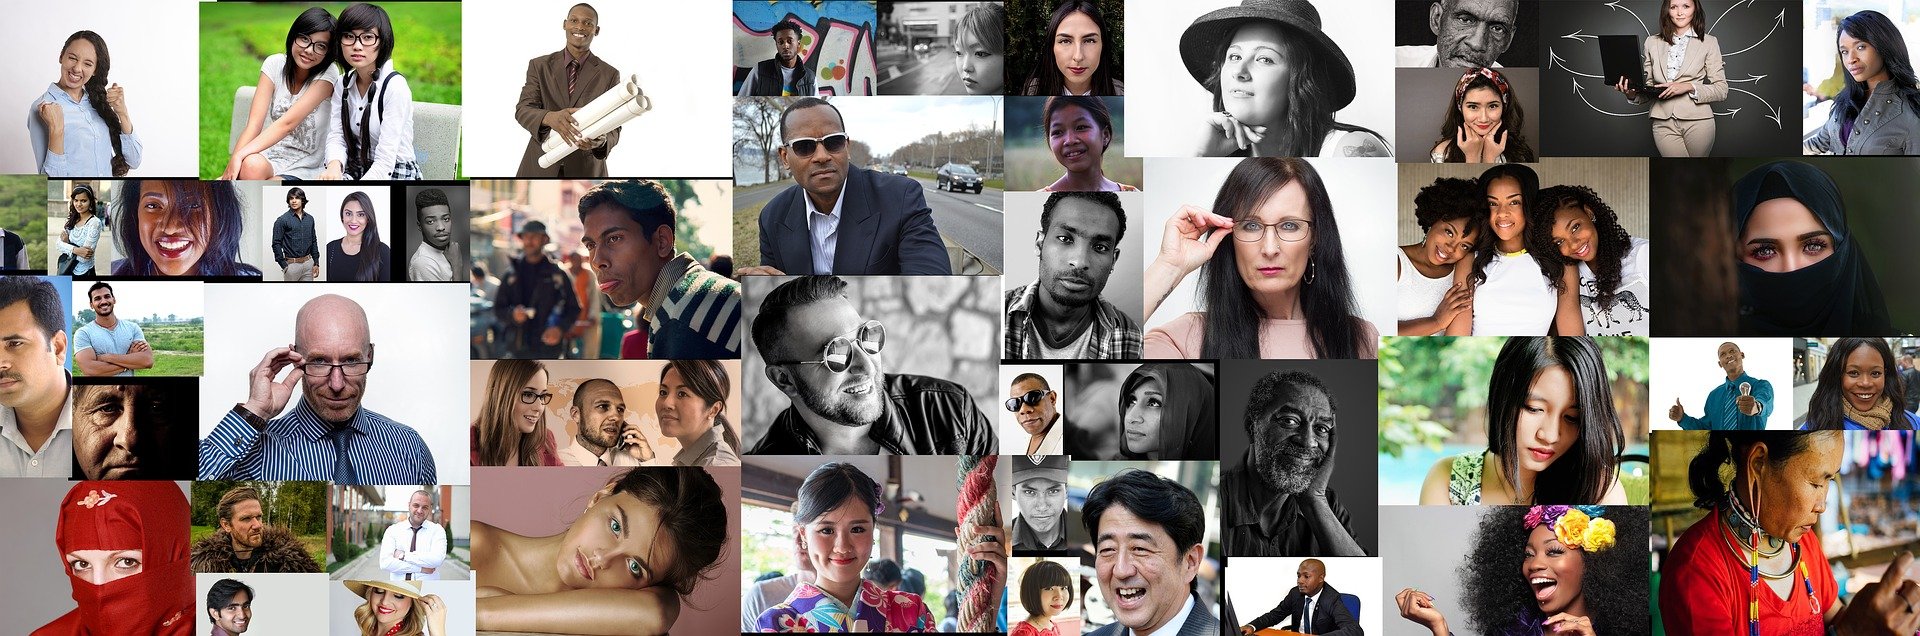 Collage of people from different cultures and ethnicities.